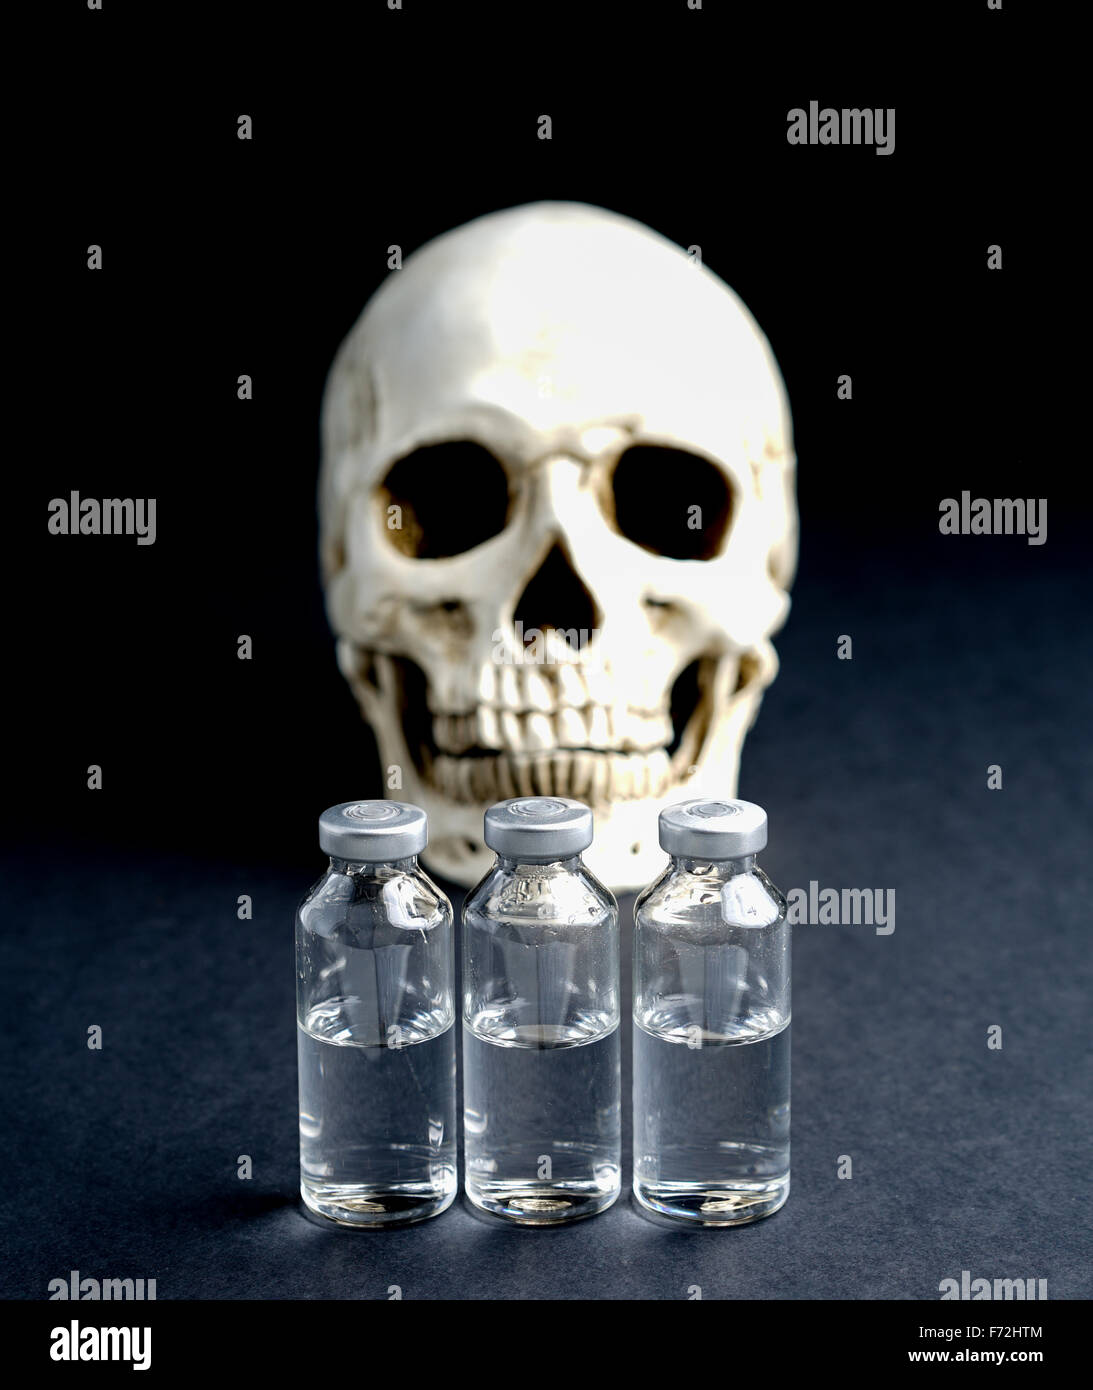 Skull and medical vials risk of death or abuse Stock Photo